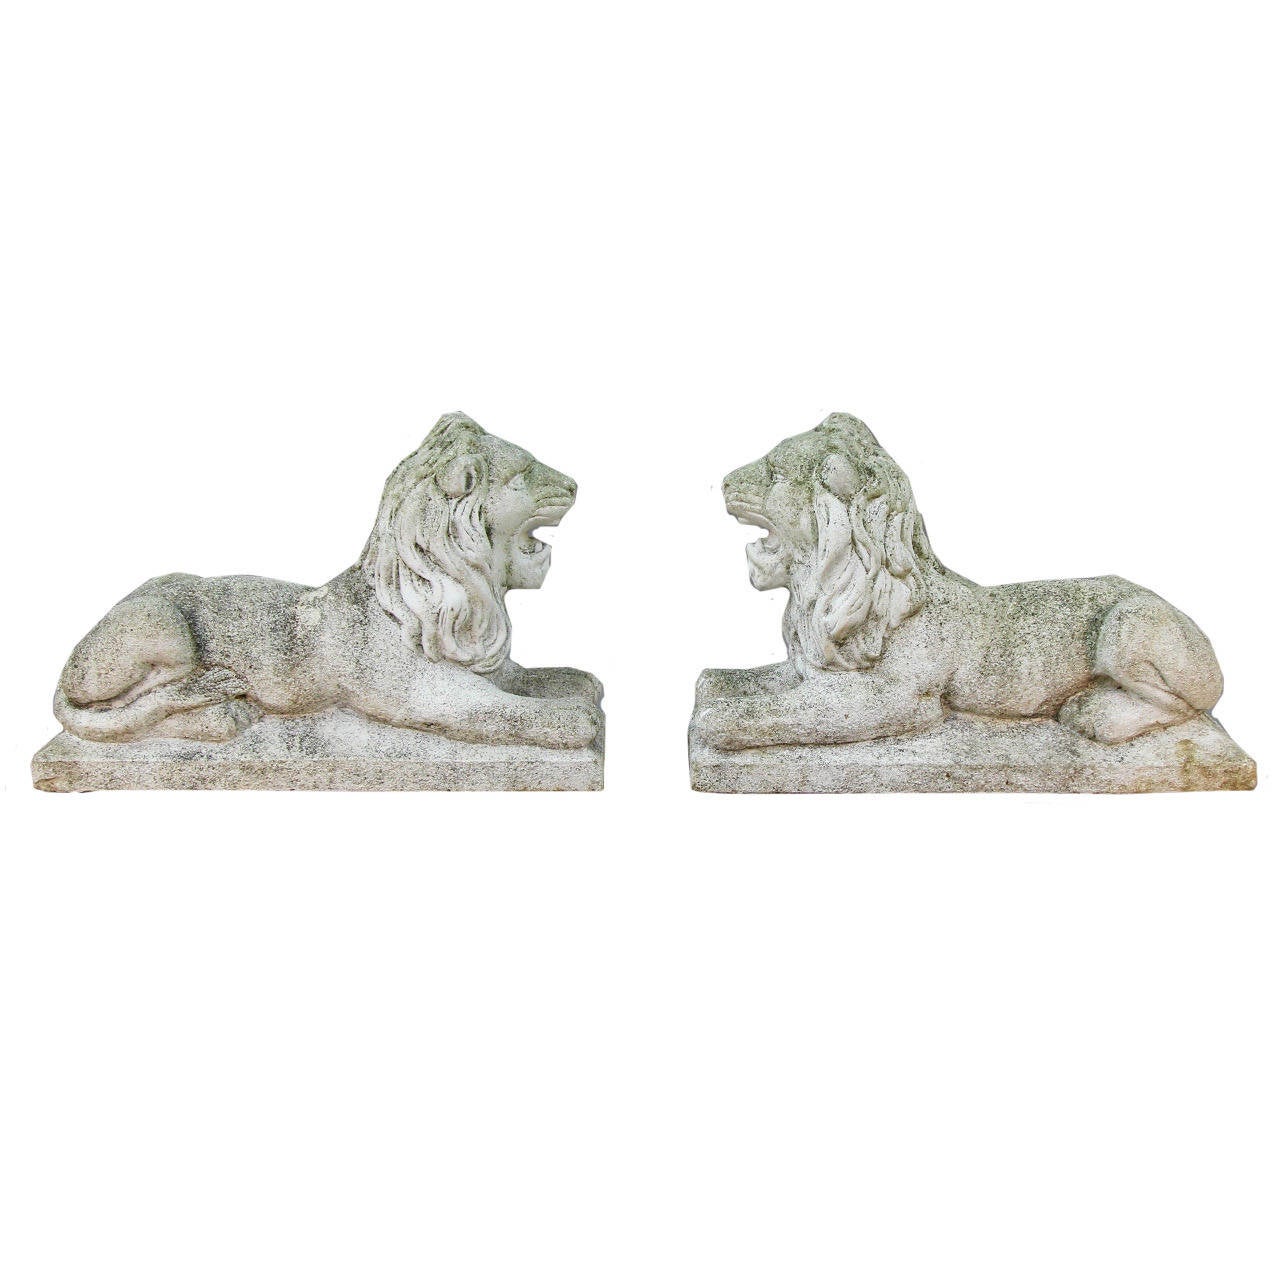 Grace your entrance or garden with this wonderful pair of or distinctive recumbent lions. Heavy and well-defined concrete casting with great age and patina in excellent vintage condition.